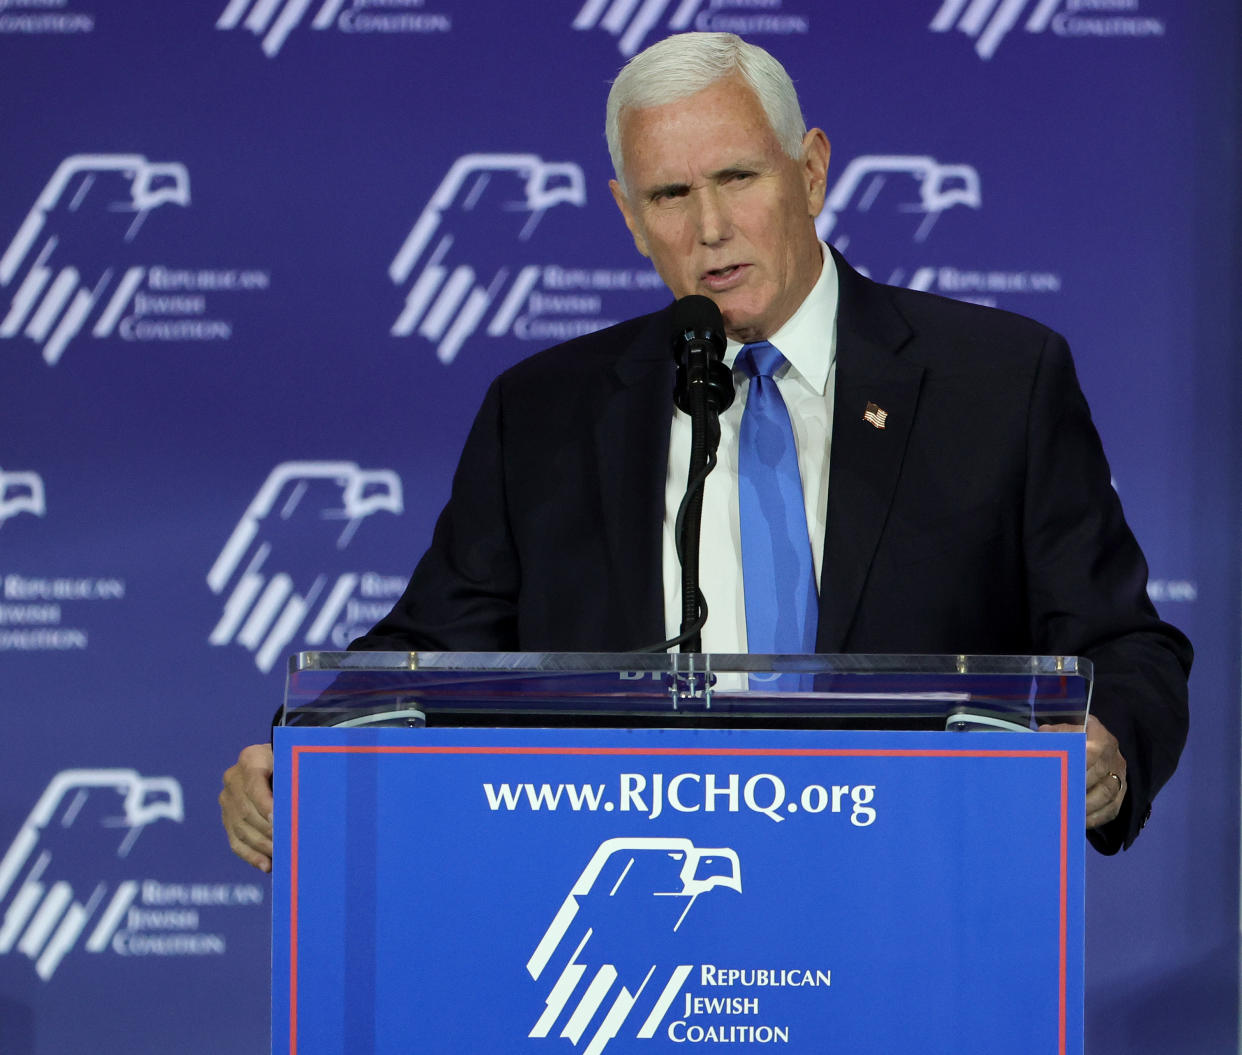 LAS VEGAS, NEVADA - OCTOBER 28: Republican presidential candidate former U.S. Vice President Mike Pence speaks after suspending his campaign for president during the Republican Jewish Coalition's Annual Leadership Summit at The Venetian Resort Las Vegas on October 28, 2023 in Las Vegas, Nevada. The summit features the top GOP presidential candidates who will face their first test on the road to the Republican nomination with the Iowa Caucuses on January 15, 2024. (Photo by Ethan Miller/Getty Images)